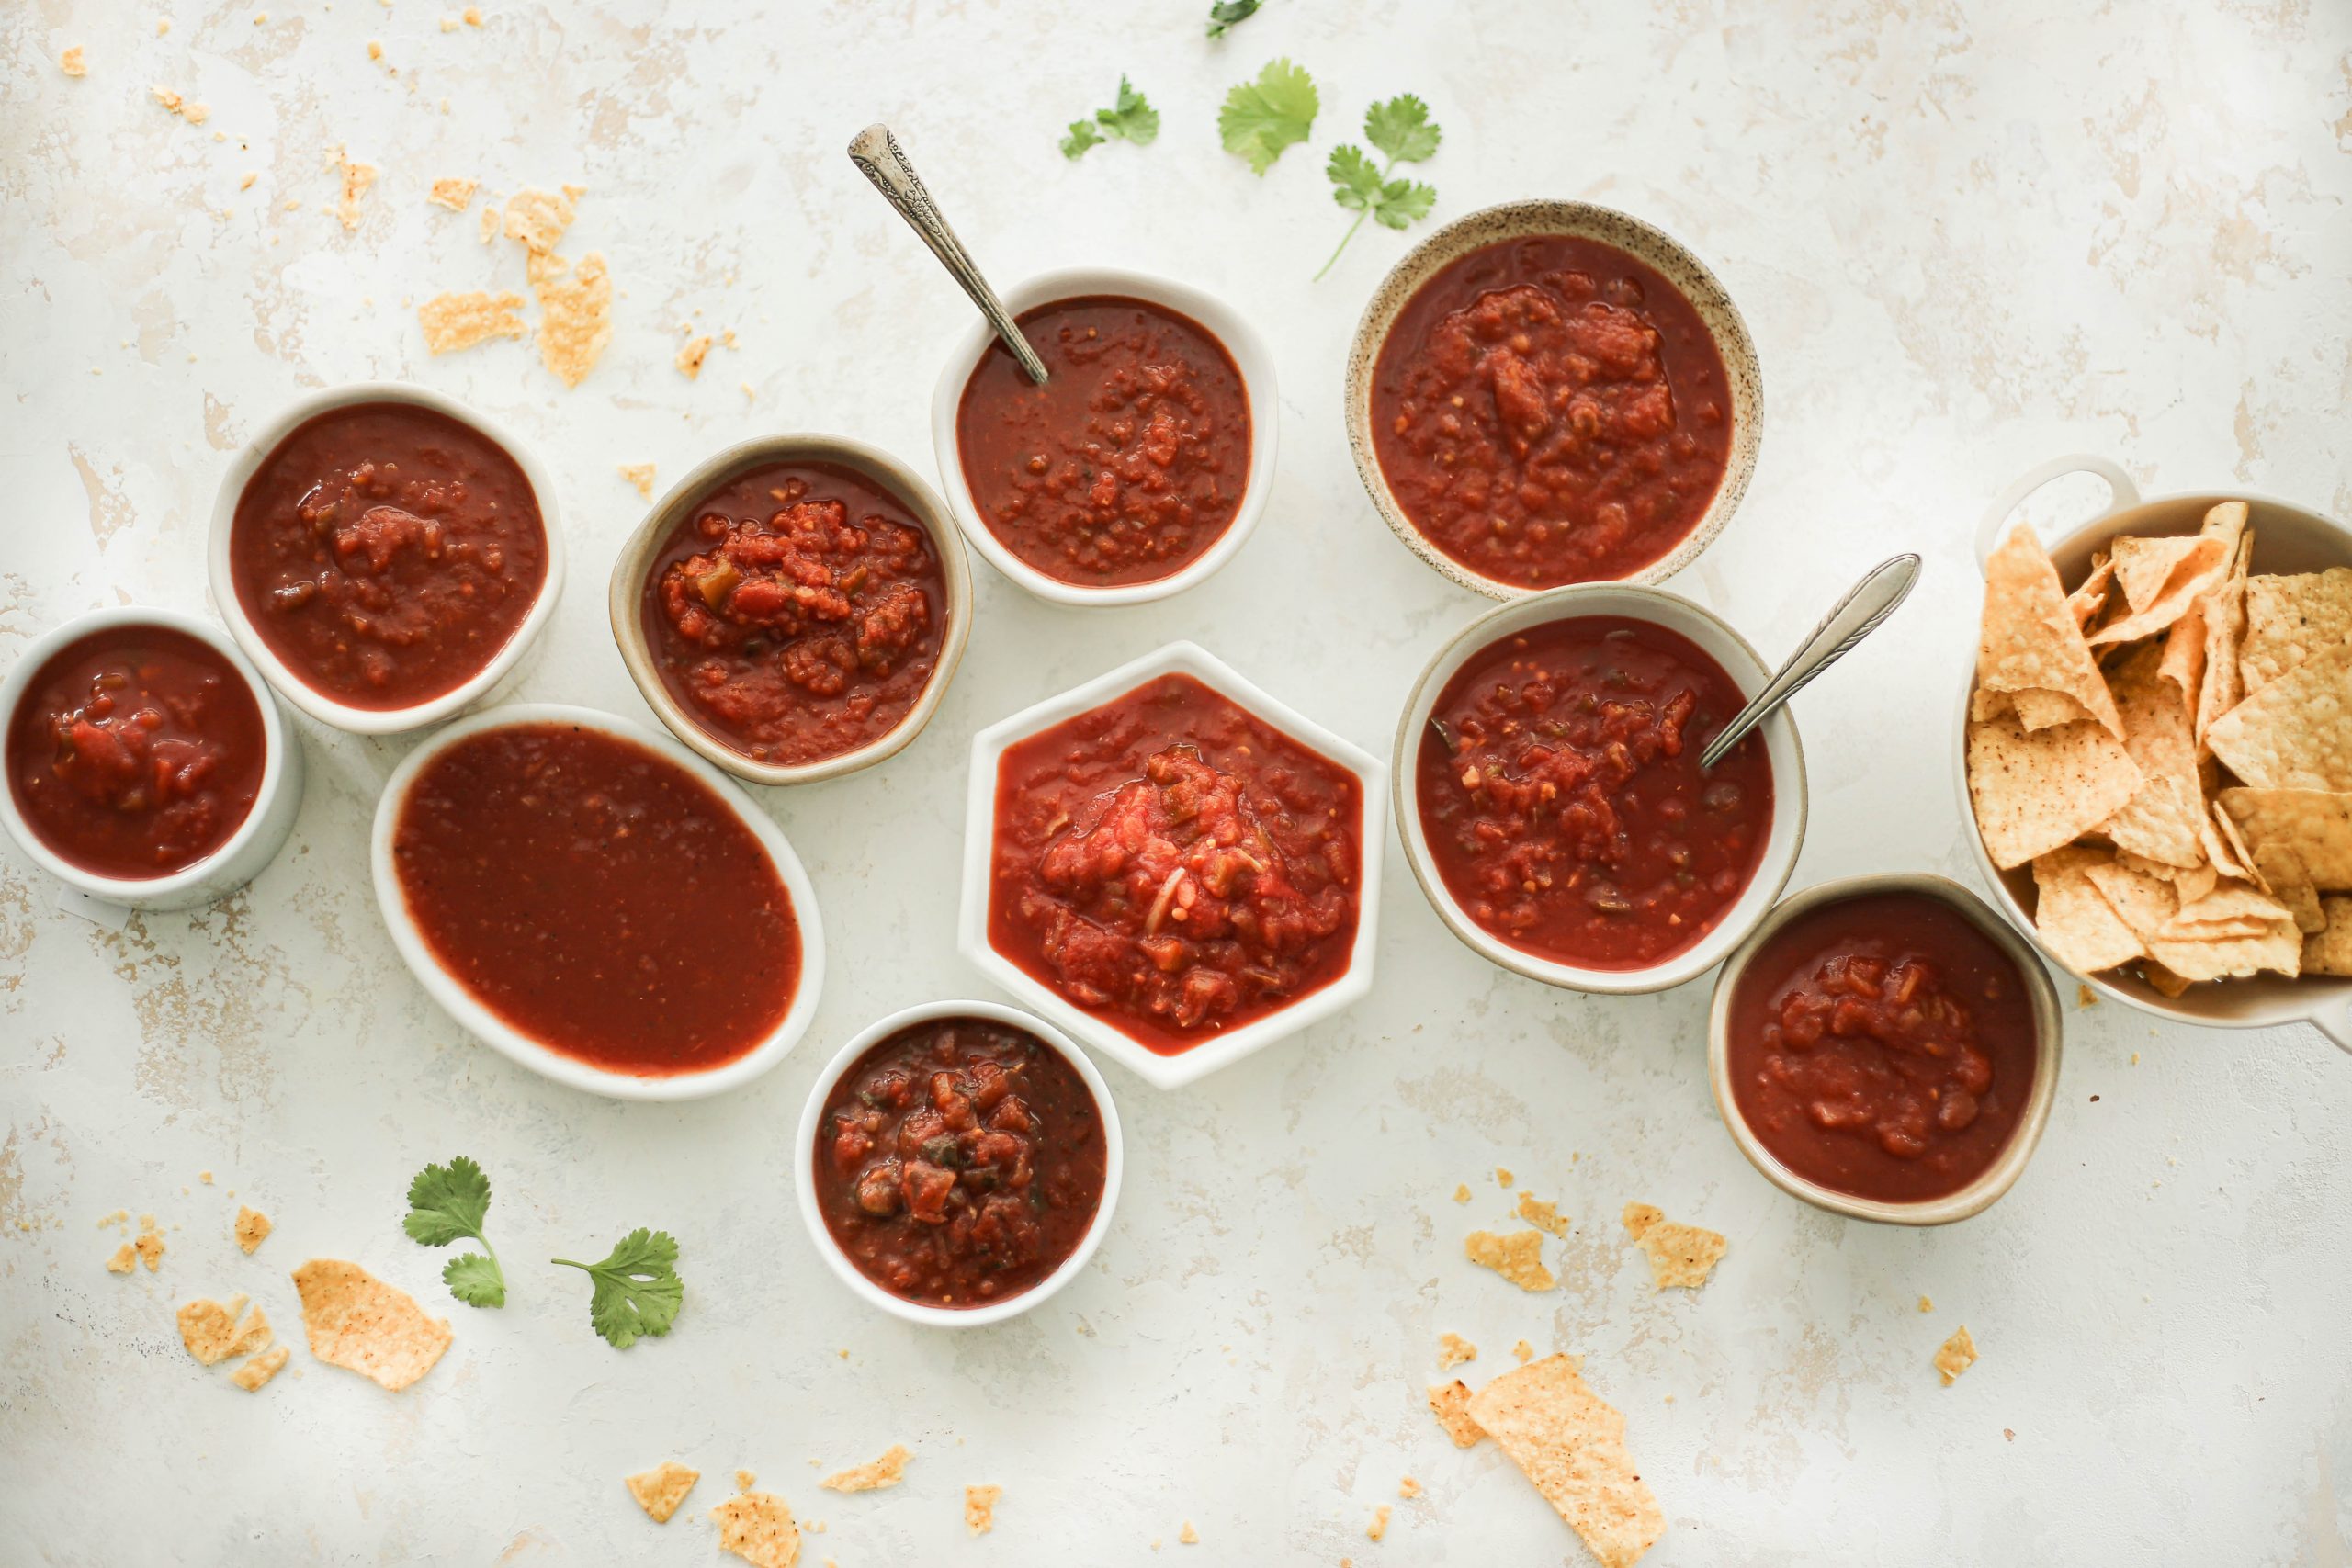 The Best Store-Bought Salsas (15 Tested!)